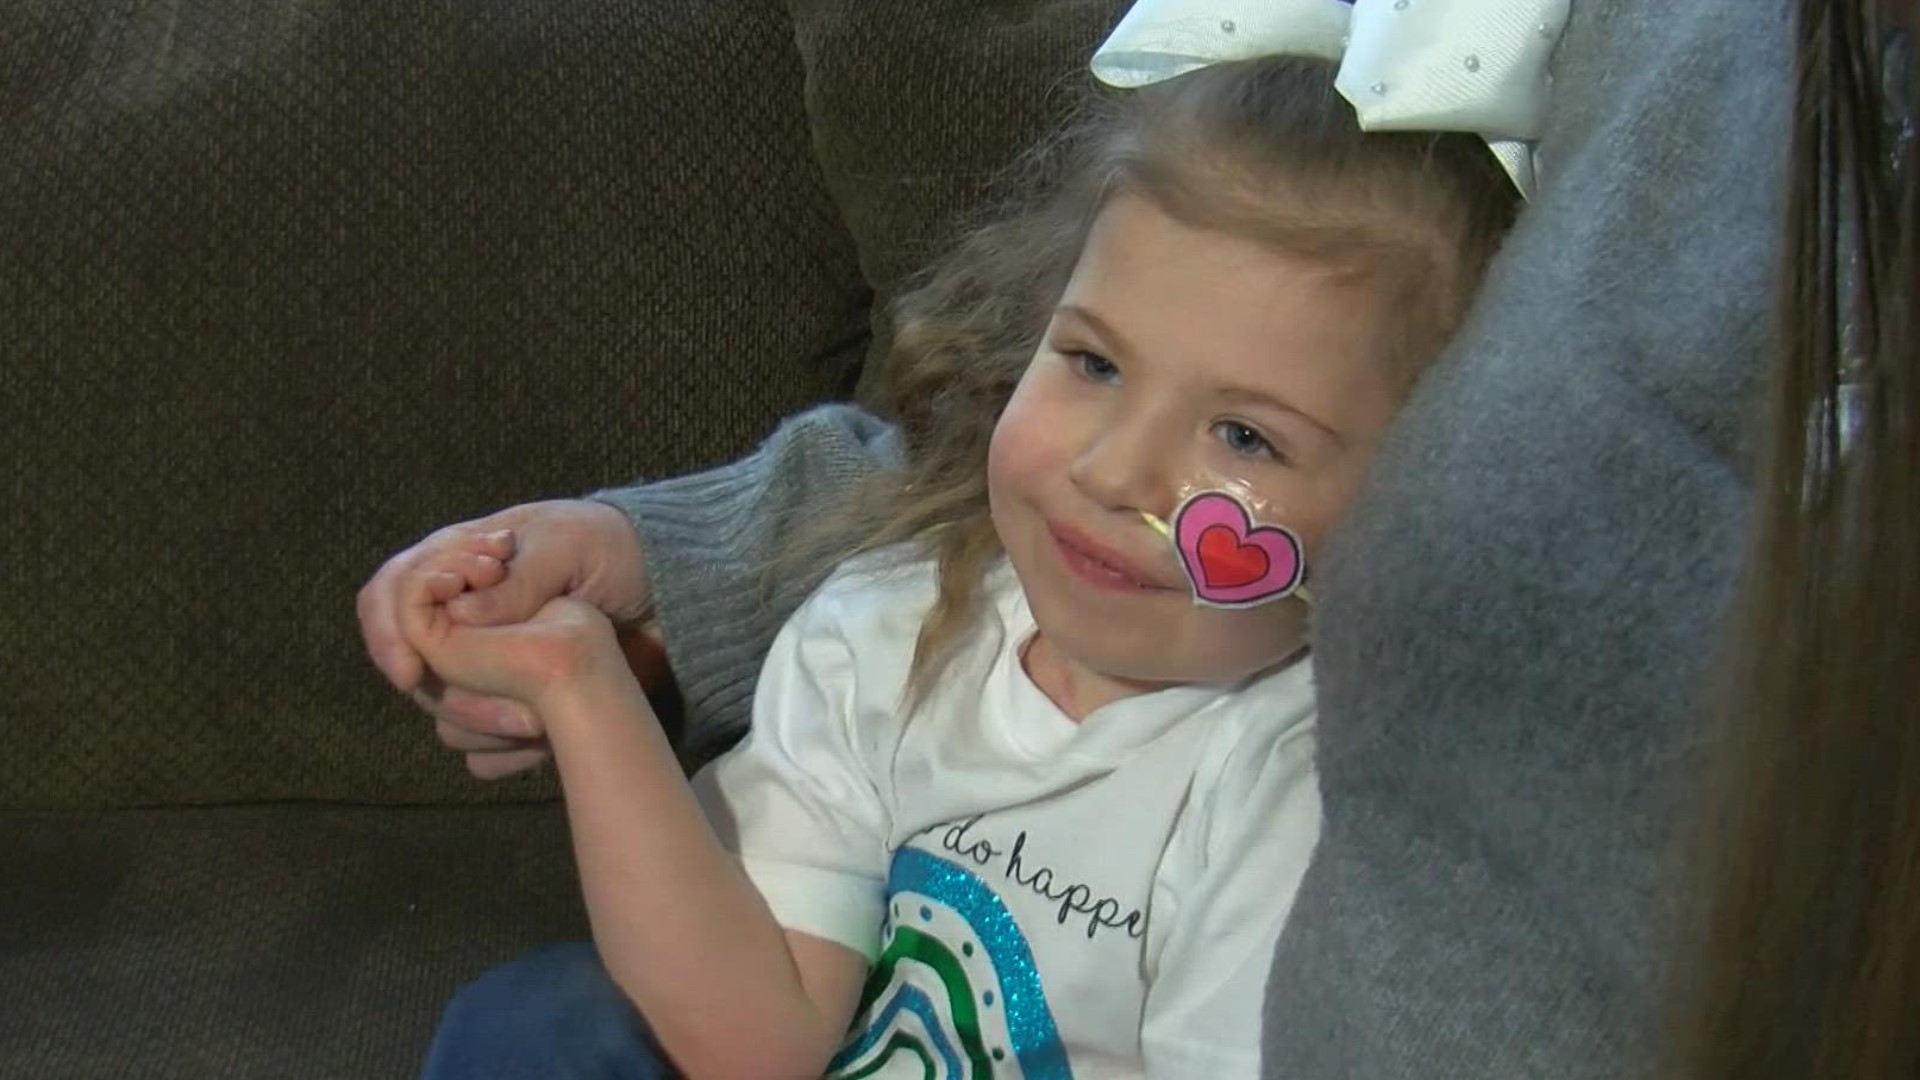 This week is an emotional one for a local family.
It marks the anniversary of a life-saving heart transplant for Emmalyn Rowan.